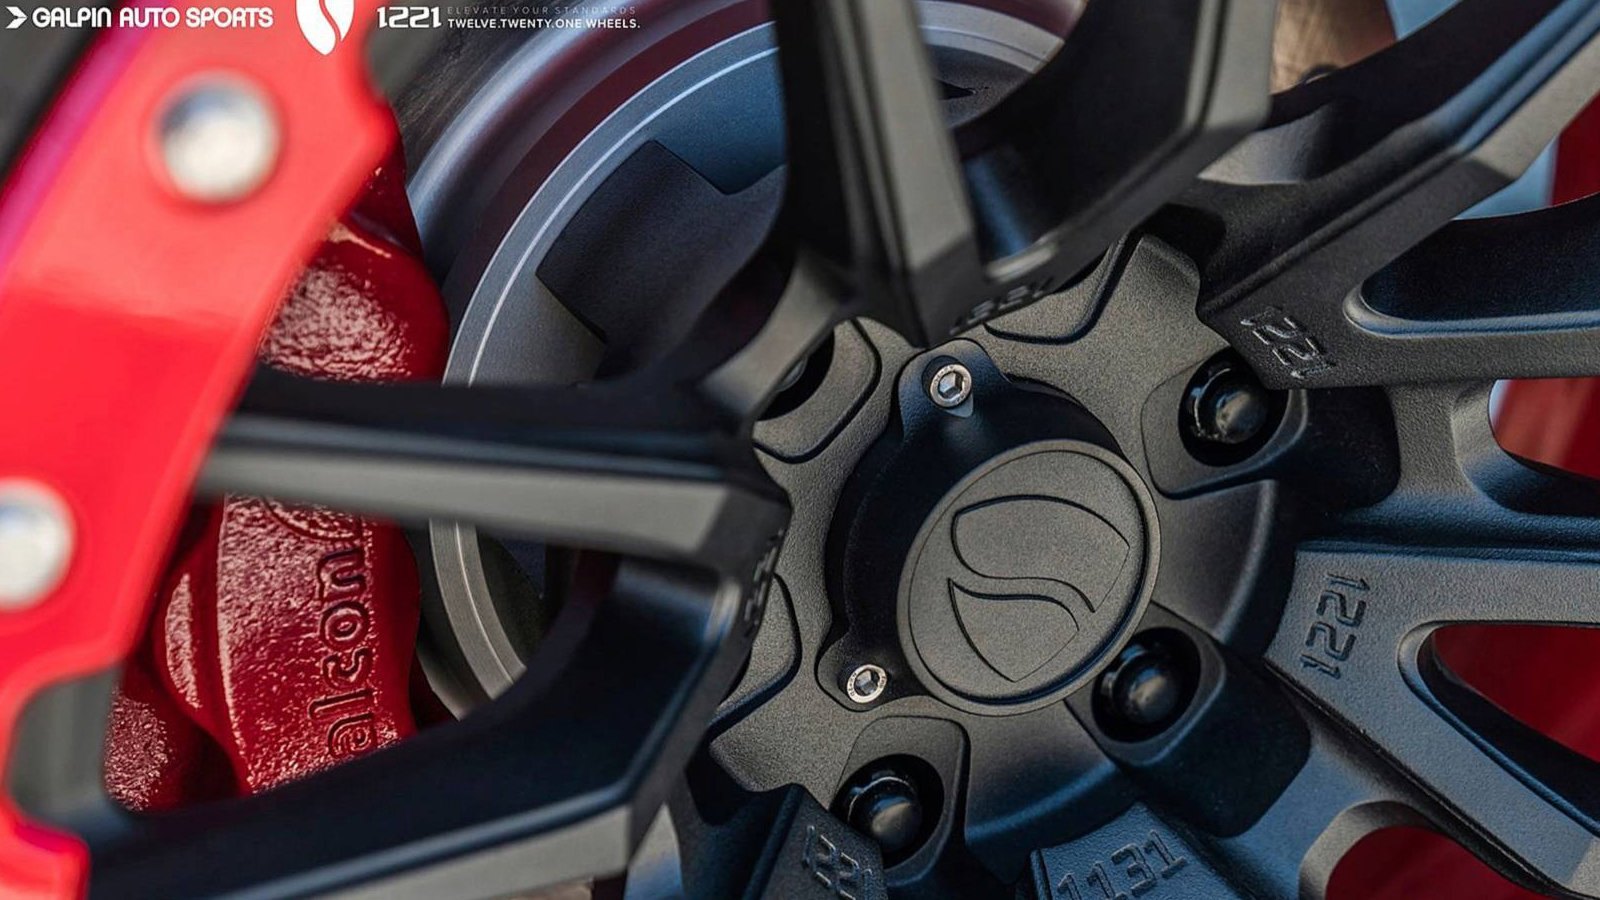 1221 Rims with Red Brakes on Black Lifted Ford F-150 - Photo by Galpin Auto Sports